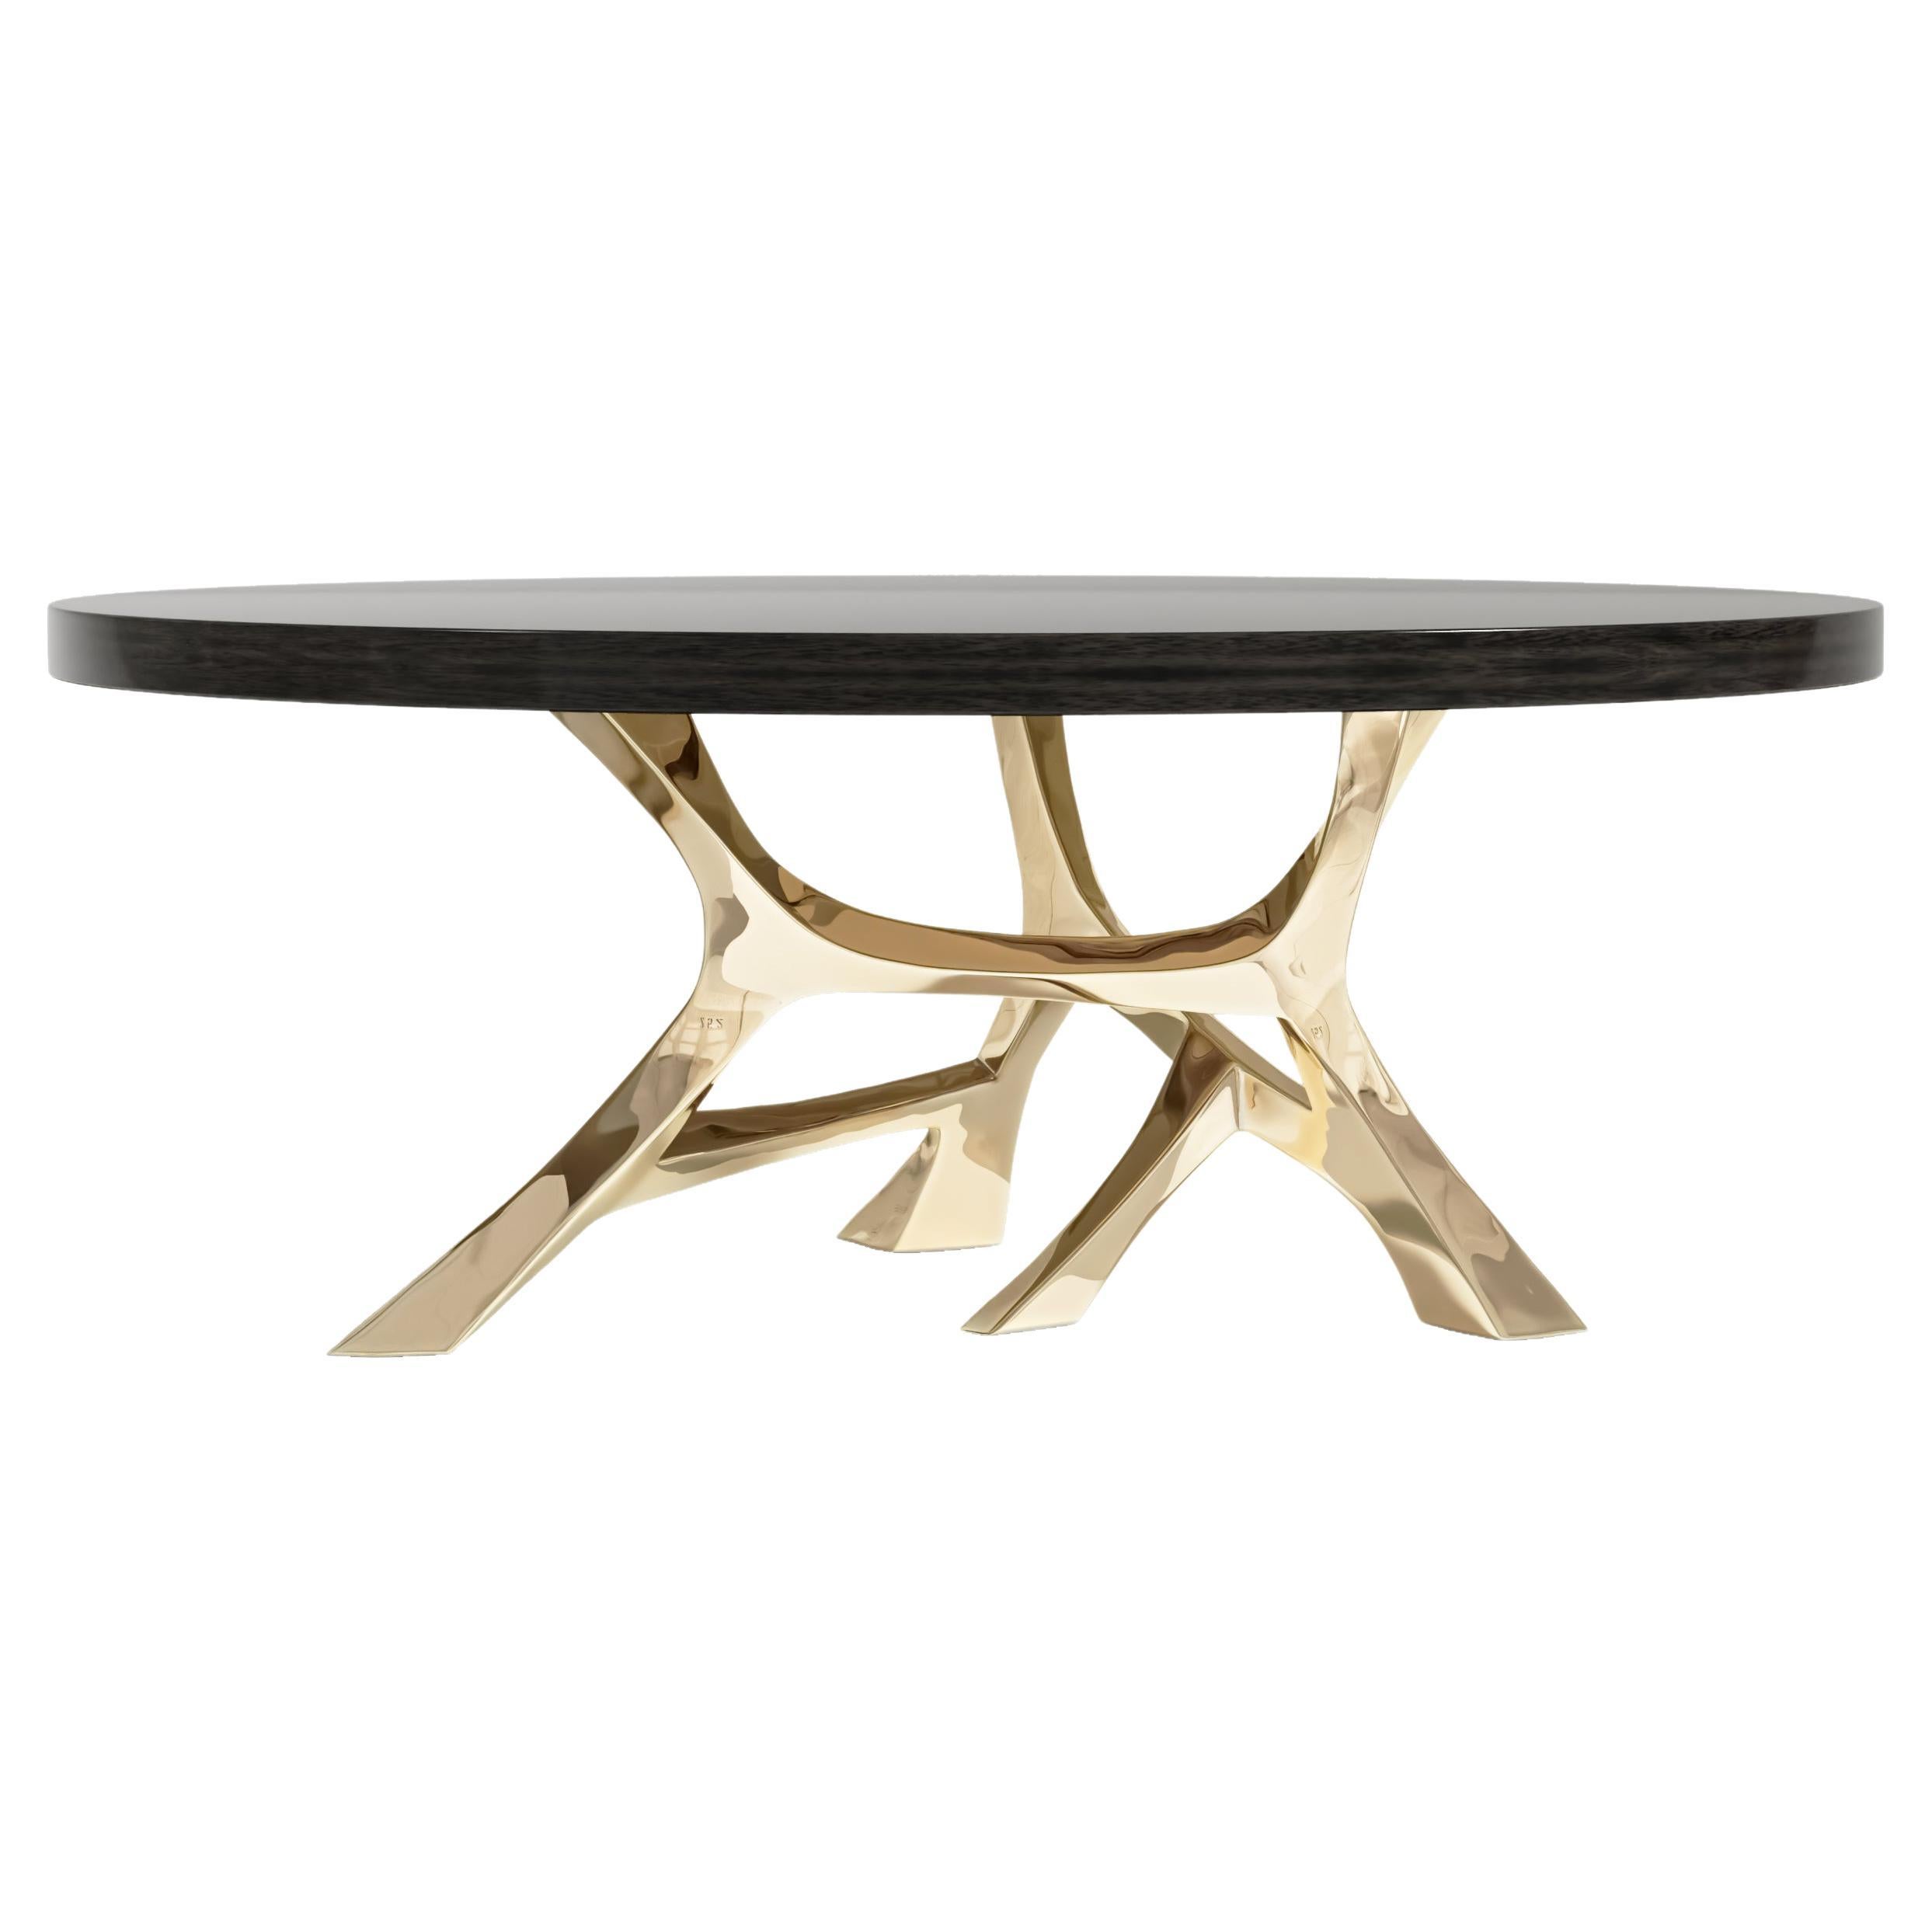 Vena Round Dining Table Polished Bronze and Black Lacquer Tabletop by Palena